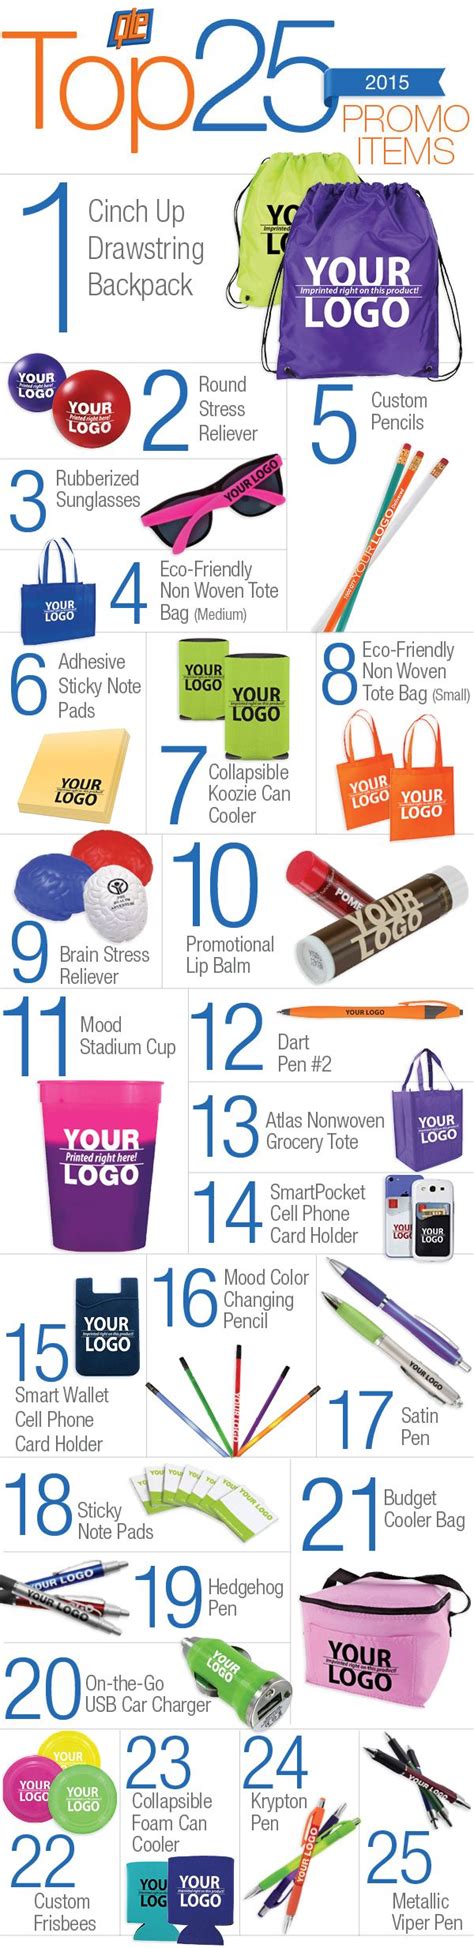 25 Of The Most Popular Promotional Products In 2015 Corporate Ts